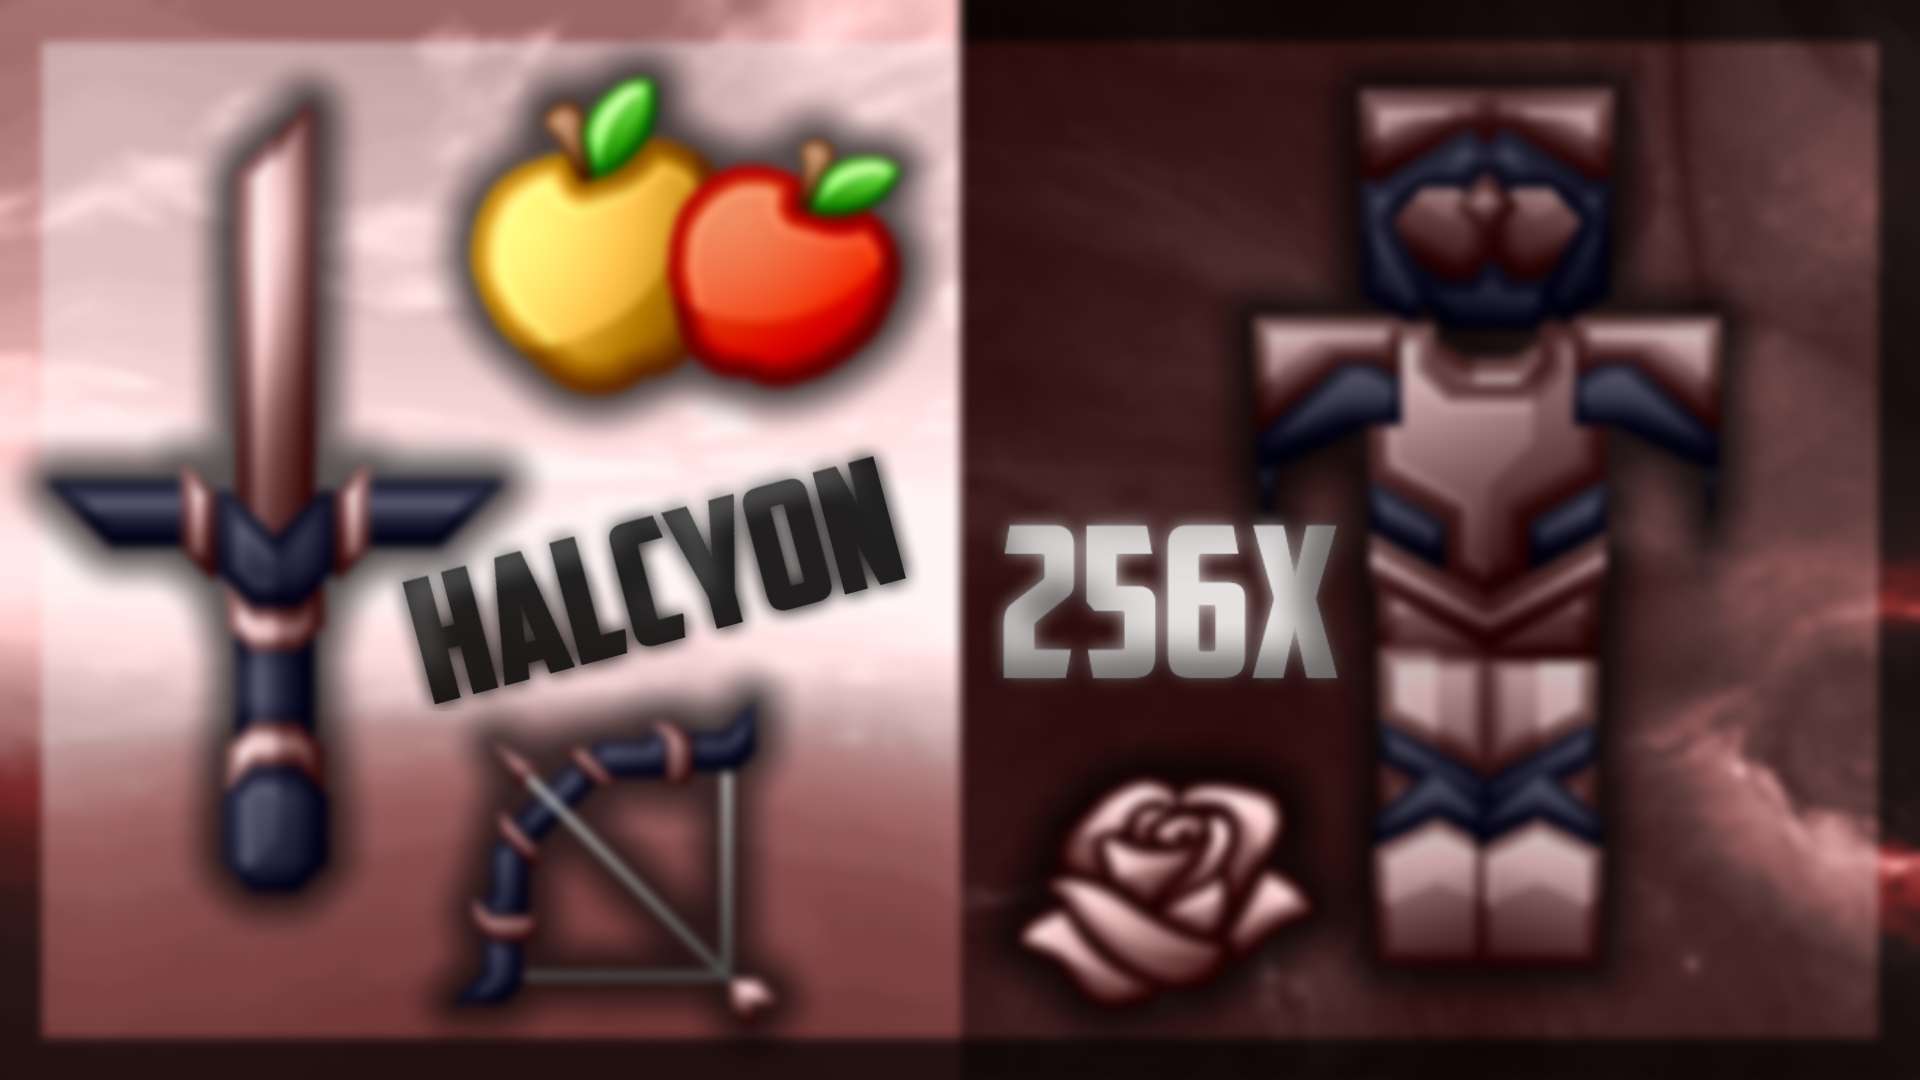 Halcyon  16 by Toyok on PvPRP